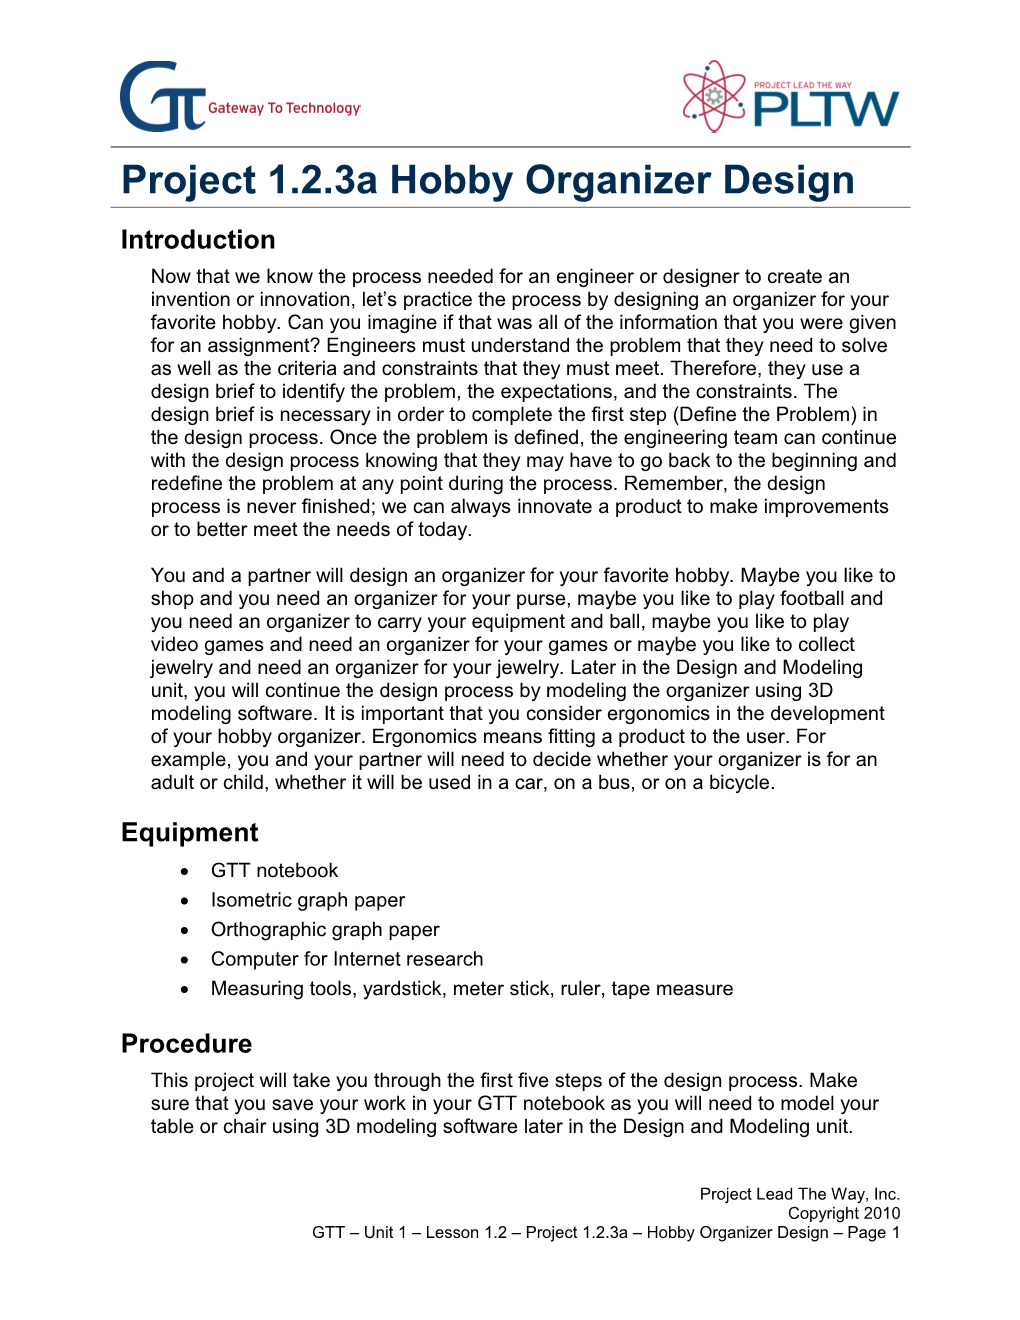 Project 1.2.3A Hobby Organizer Design